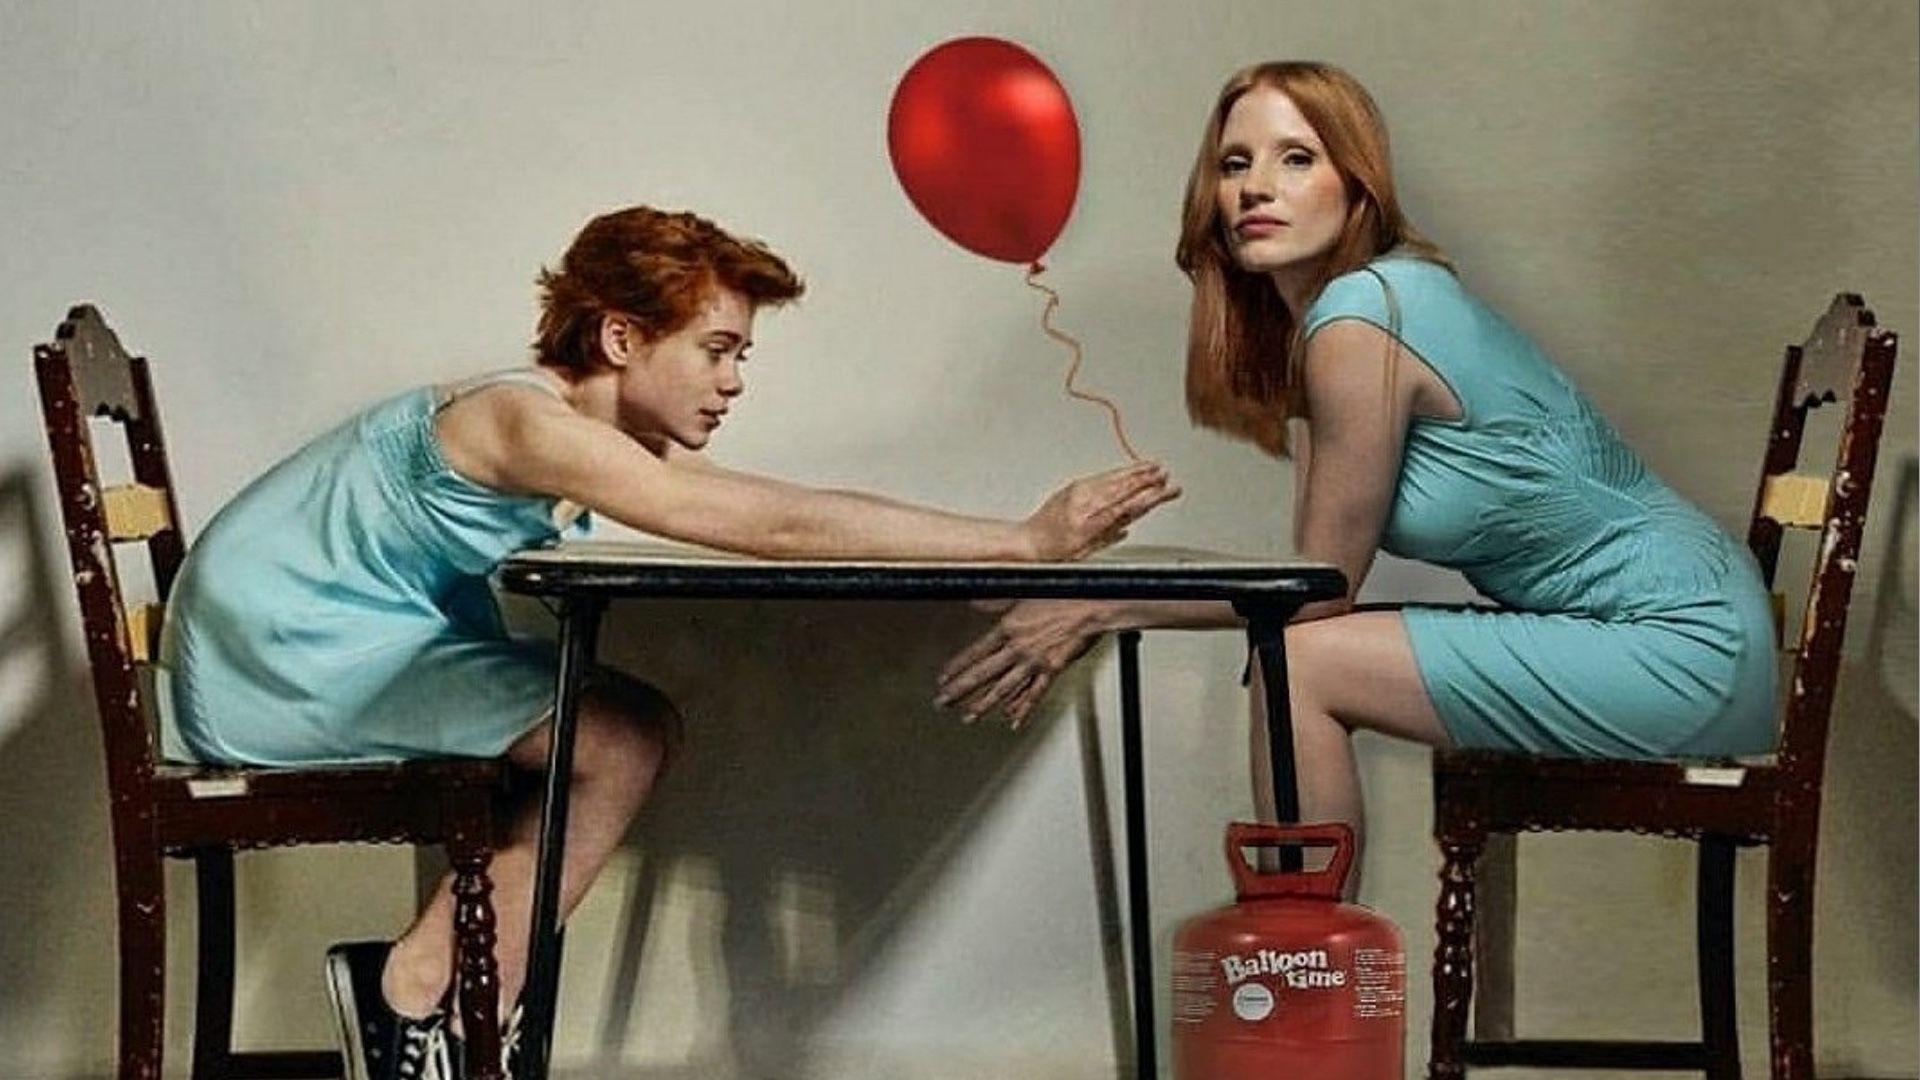 New IT: CHAPTER 2 Photo Features Young Beverly Passing The Red